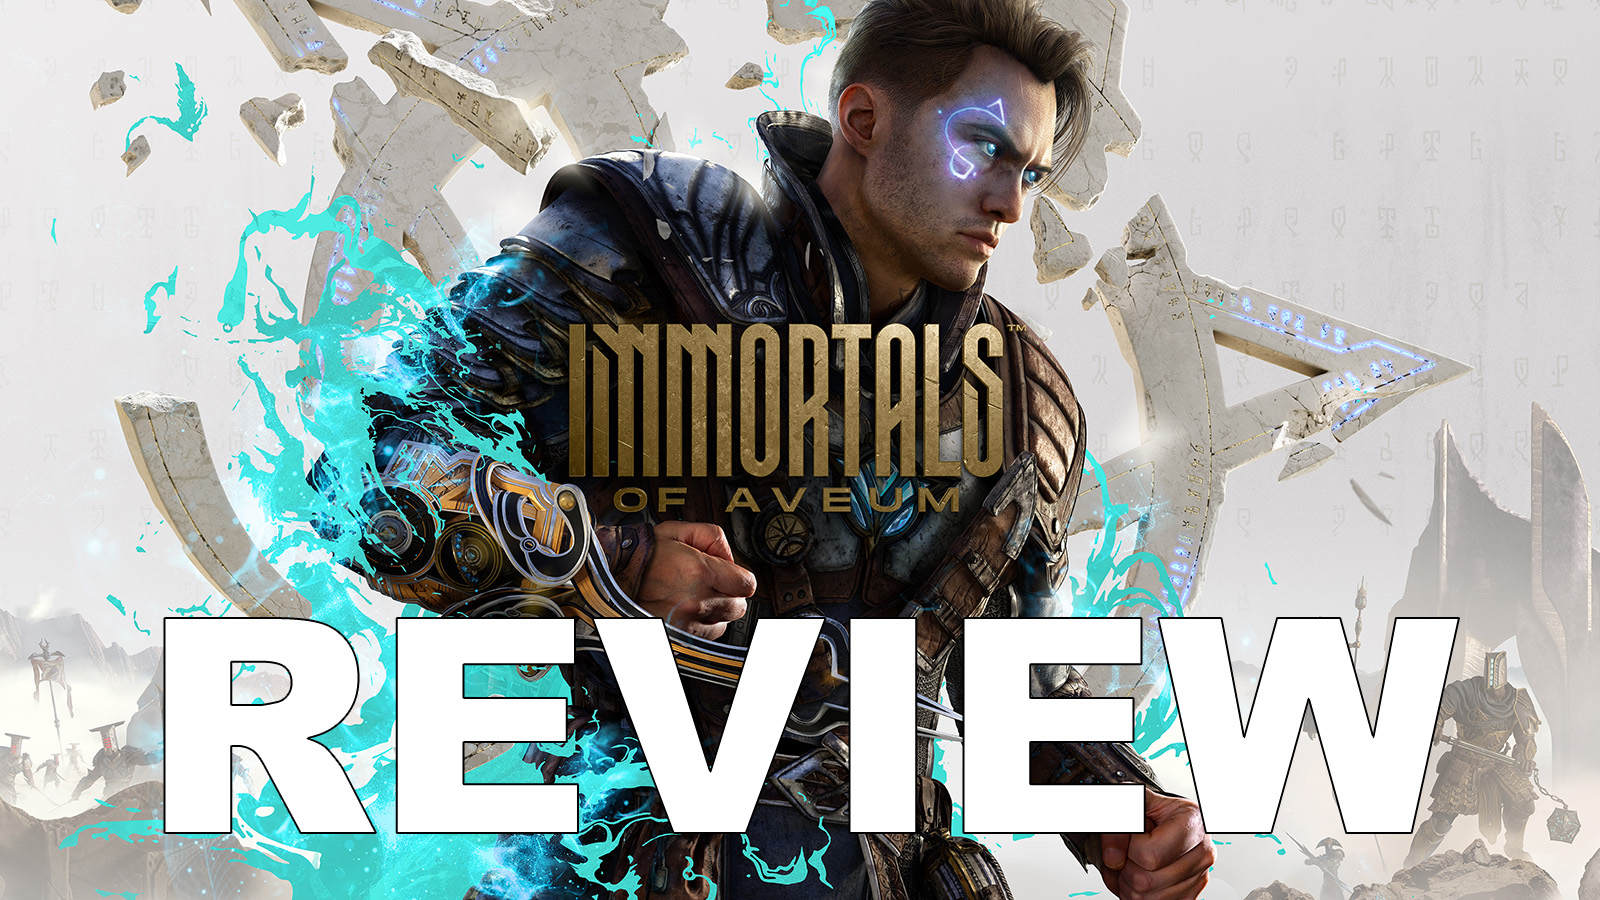 Immortals Of Aveum Review – A Fun Fantasy Adventure With Lots Of Magic